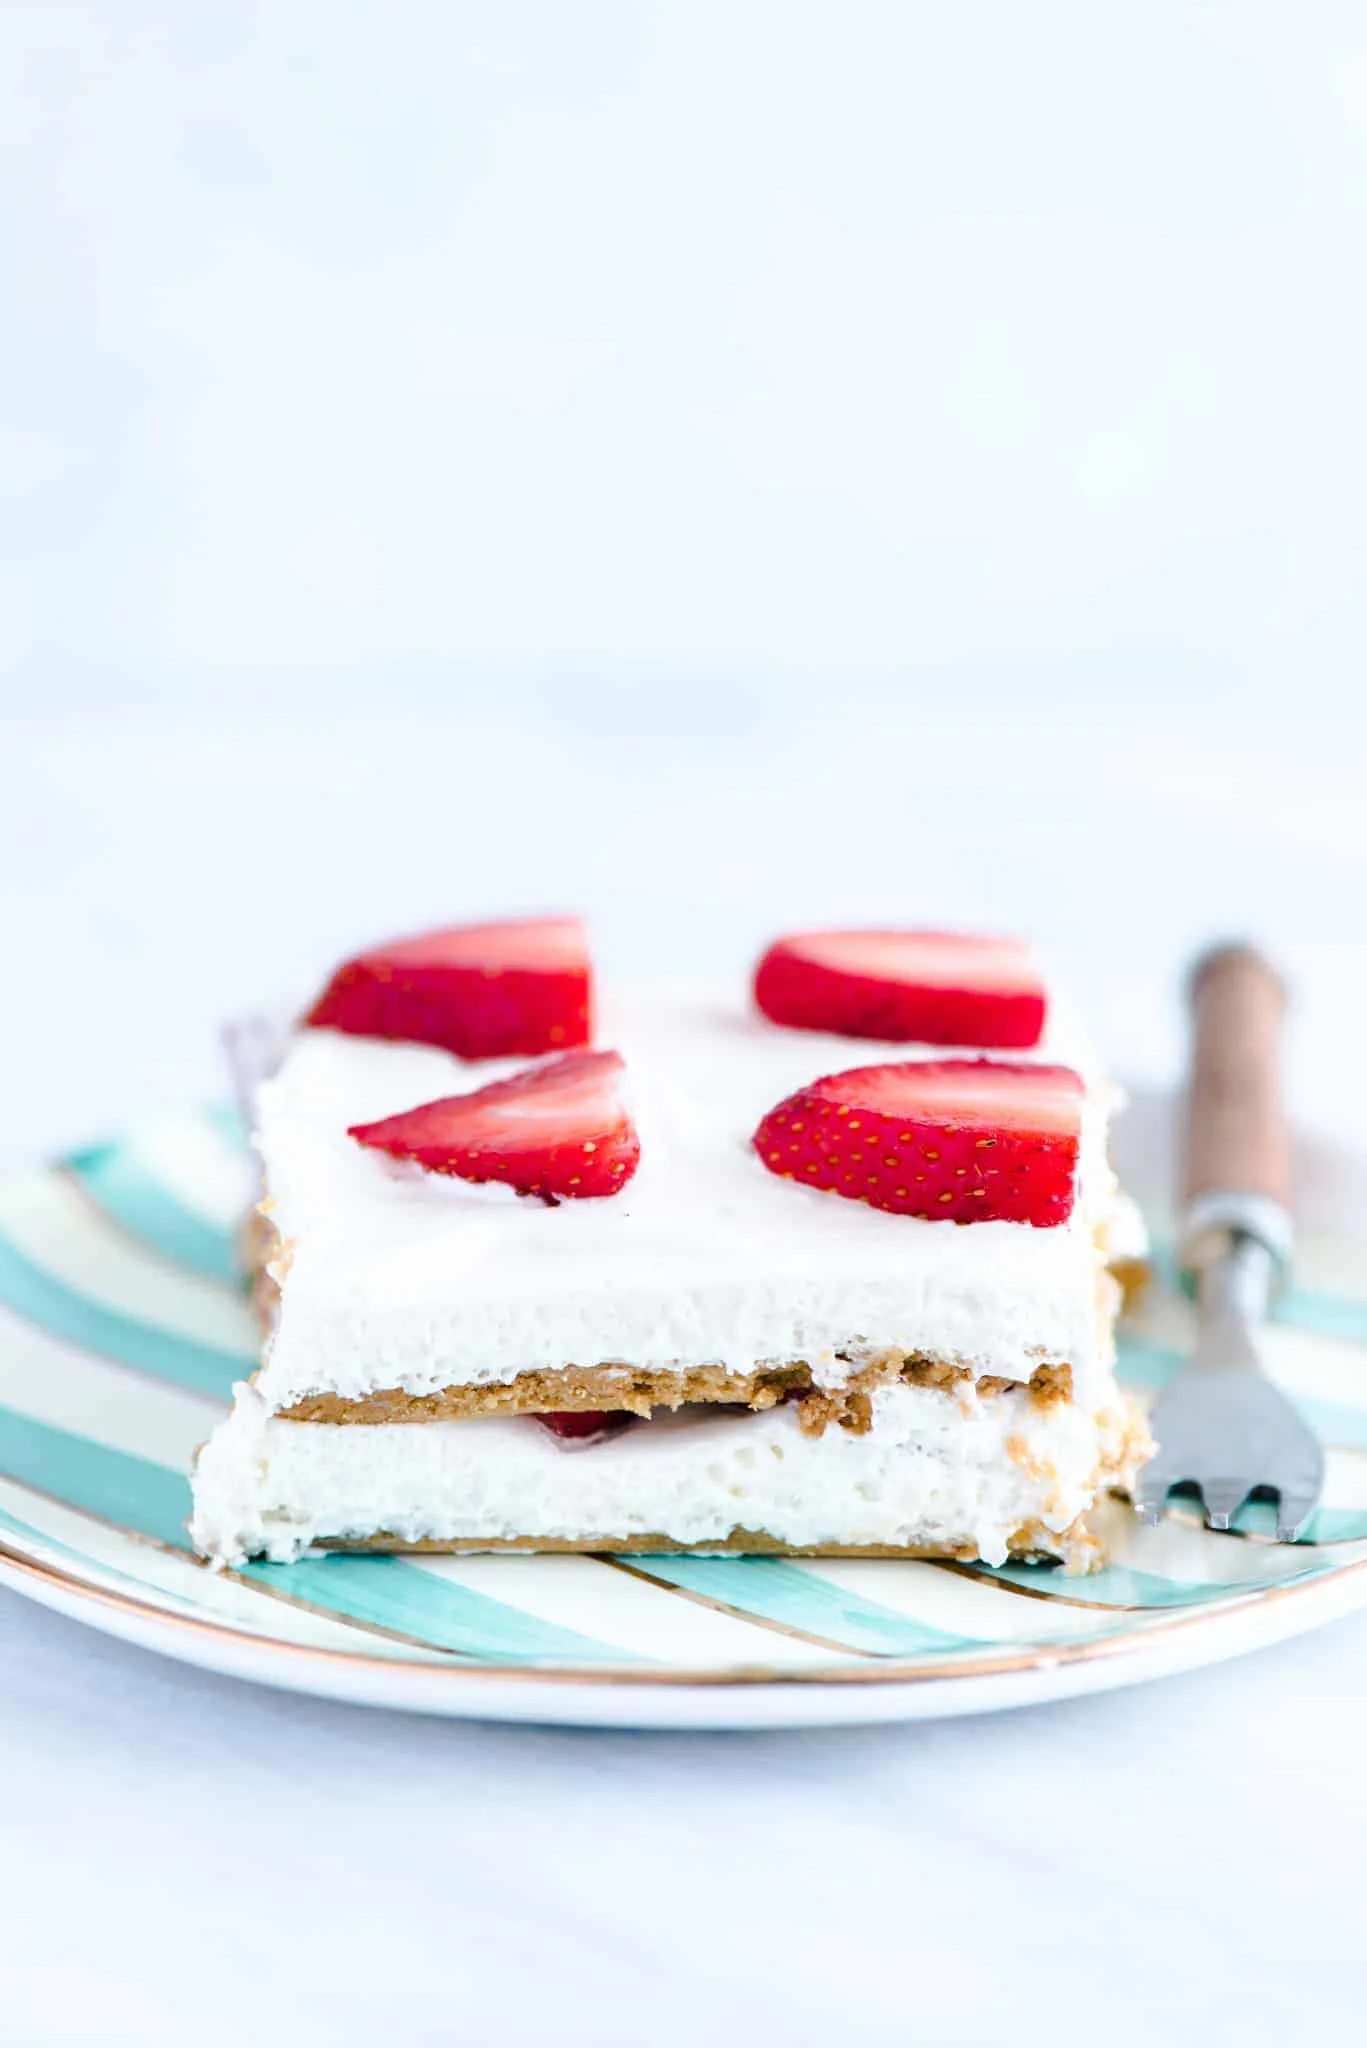 A slice of gluten free strawberry icebox cake on a green and white striped plate